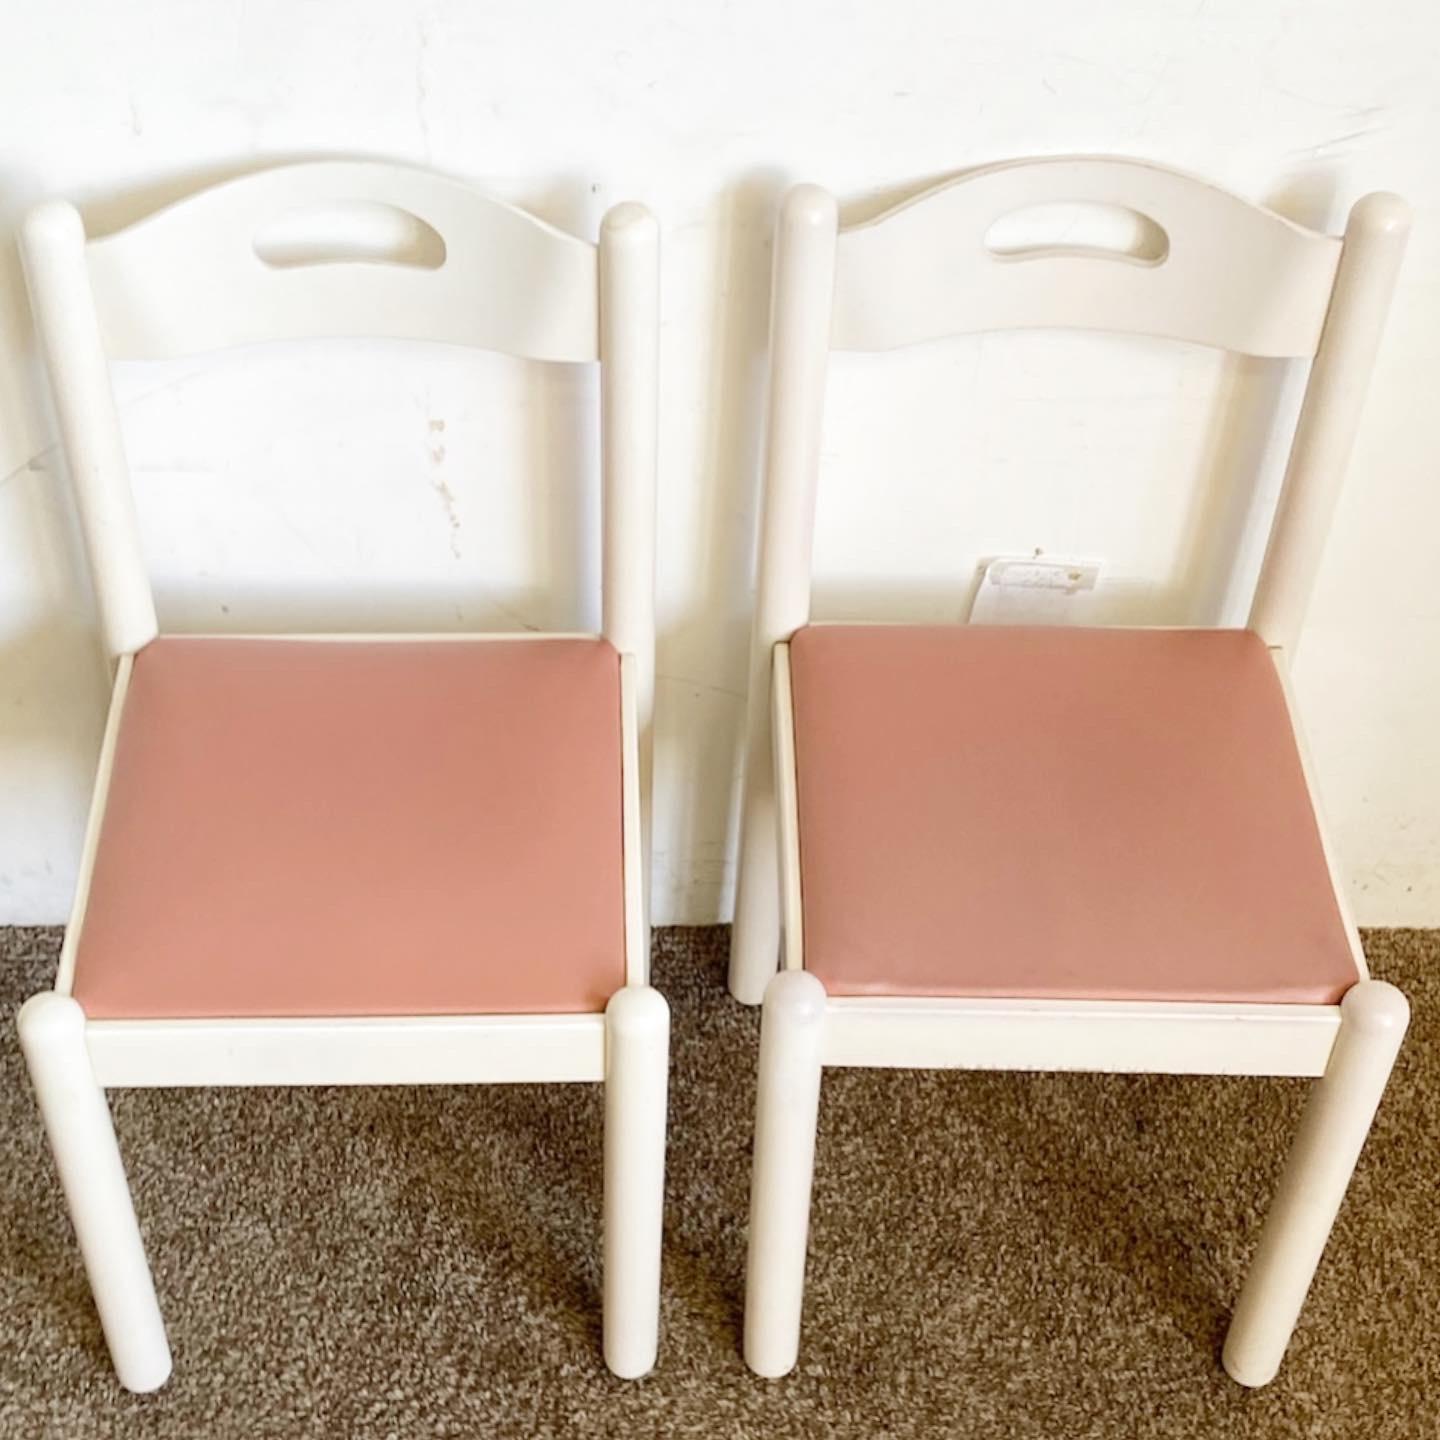 Elevate your dining space with the White and Pink Carimate Style Chairs. This set of 4 chairs combines a modern white frame with vibrant pink cushions, offering both style and comfort.
Minor wear to the finish as seen in the photos.